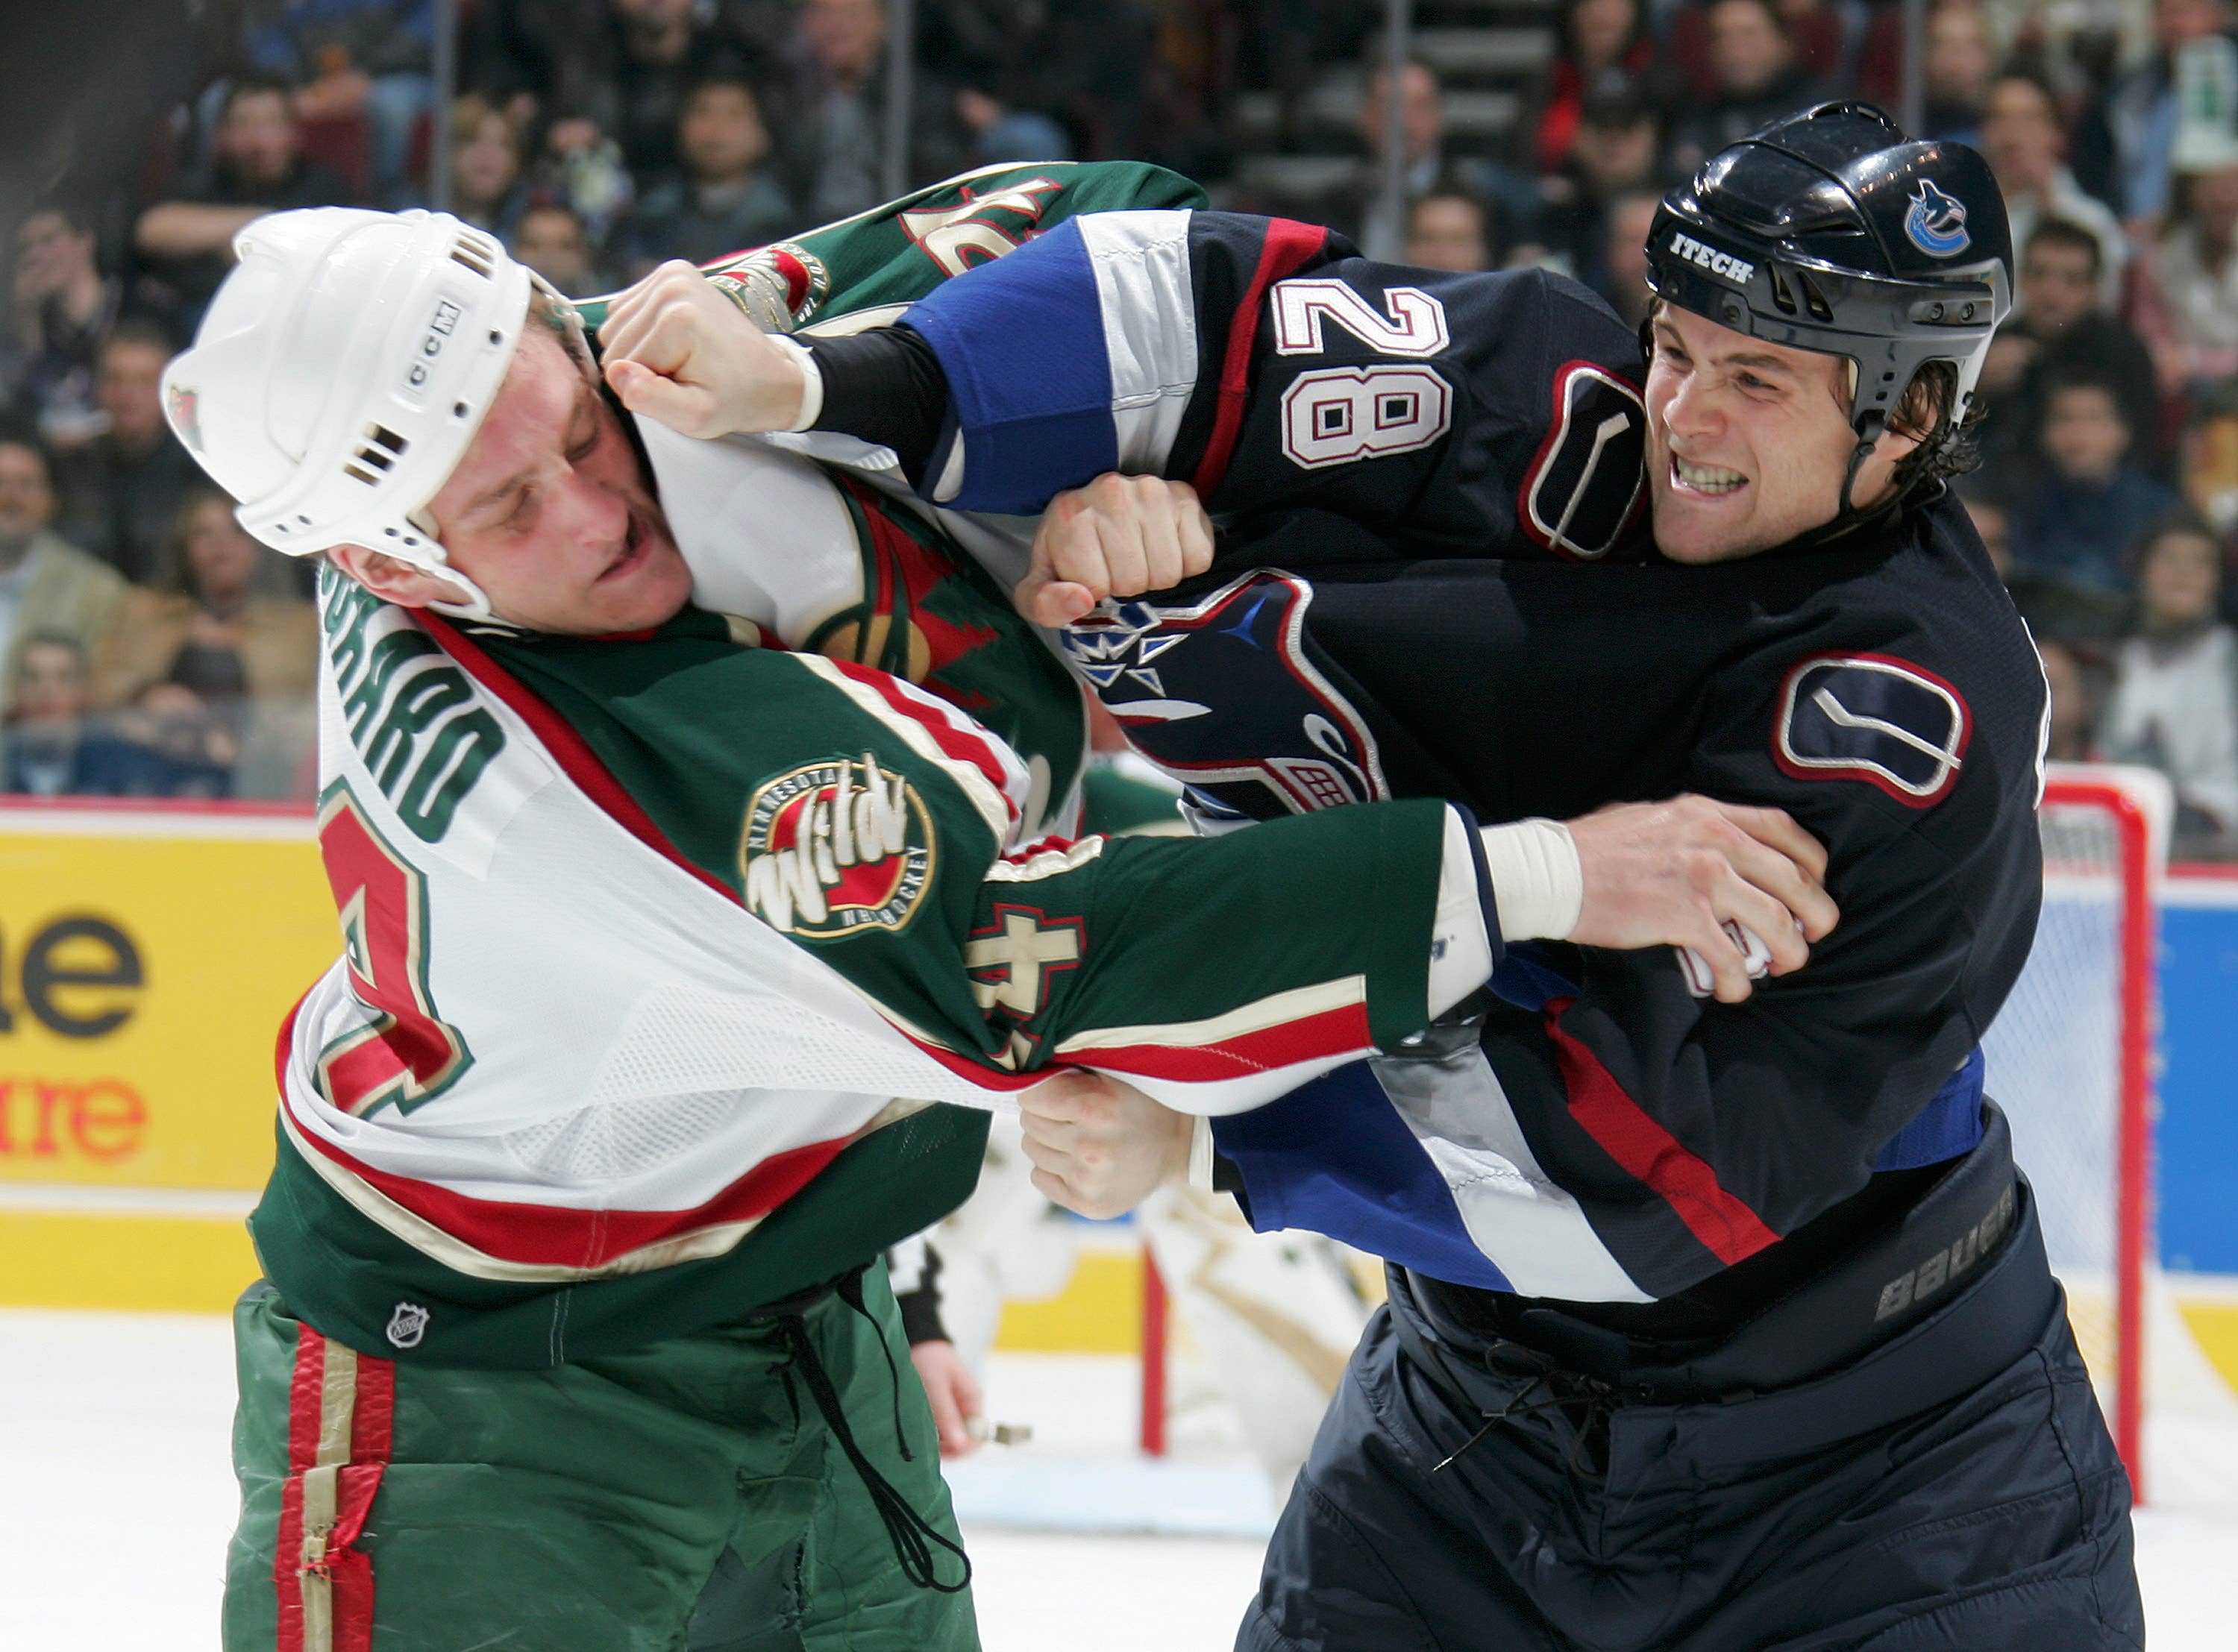 NHL enforcers fighting during a game